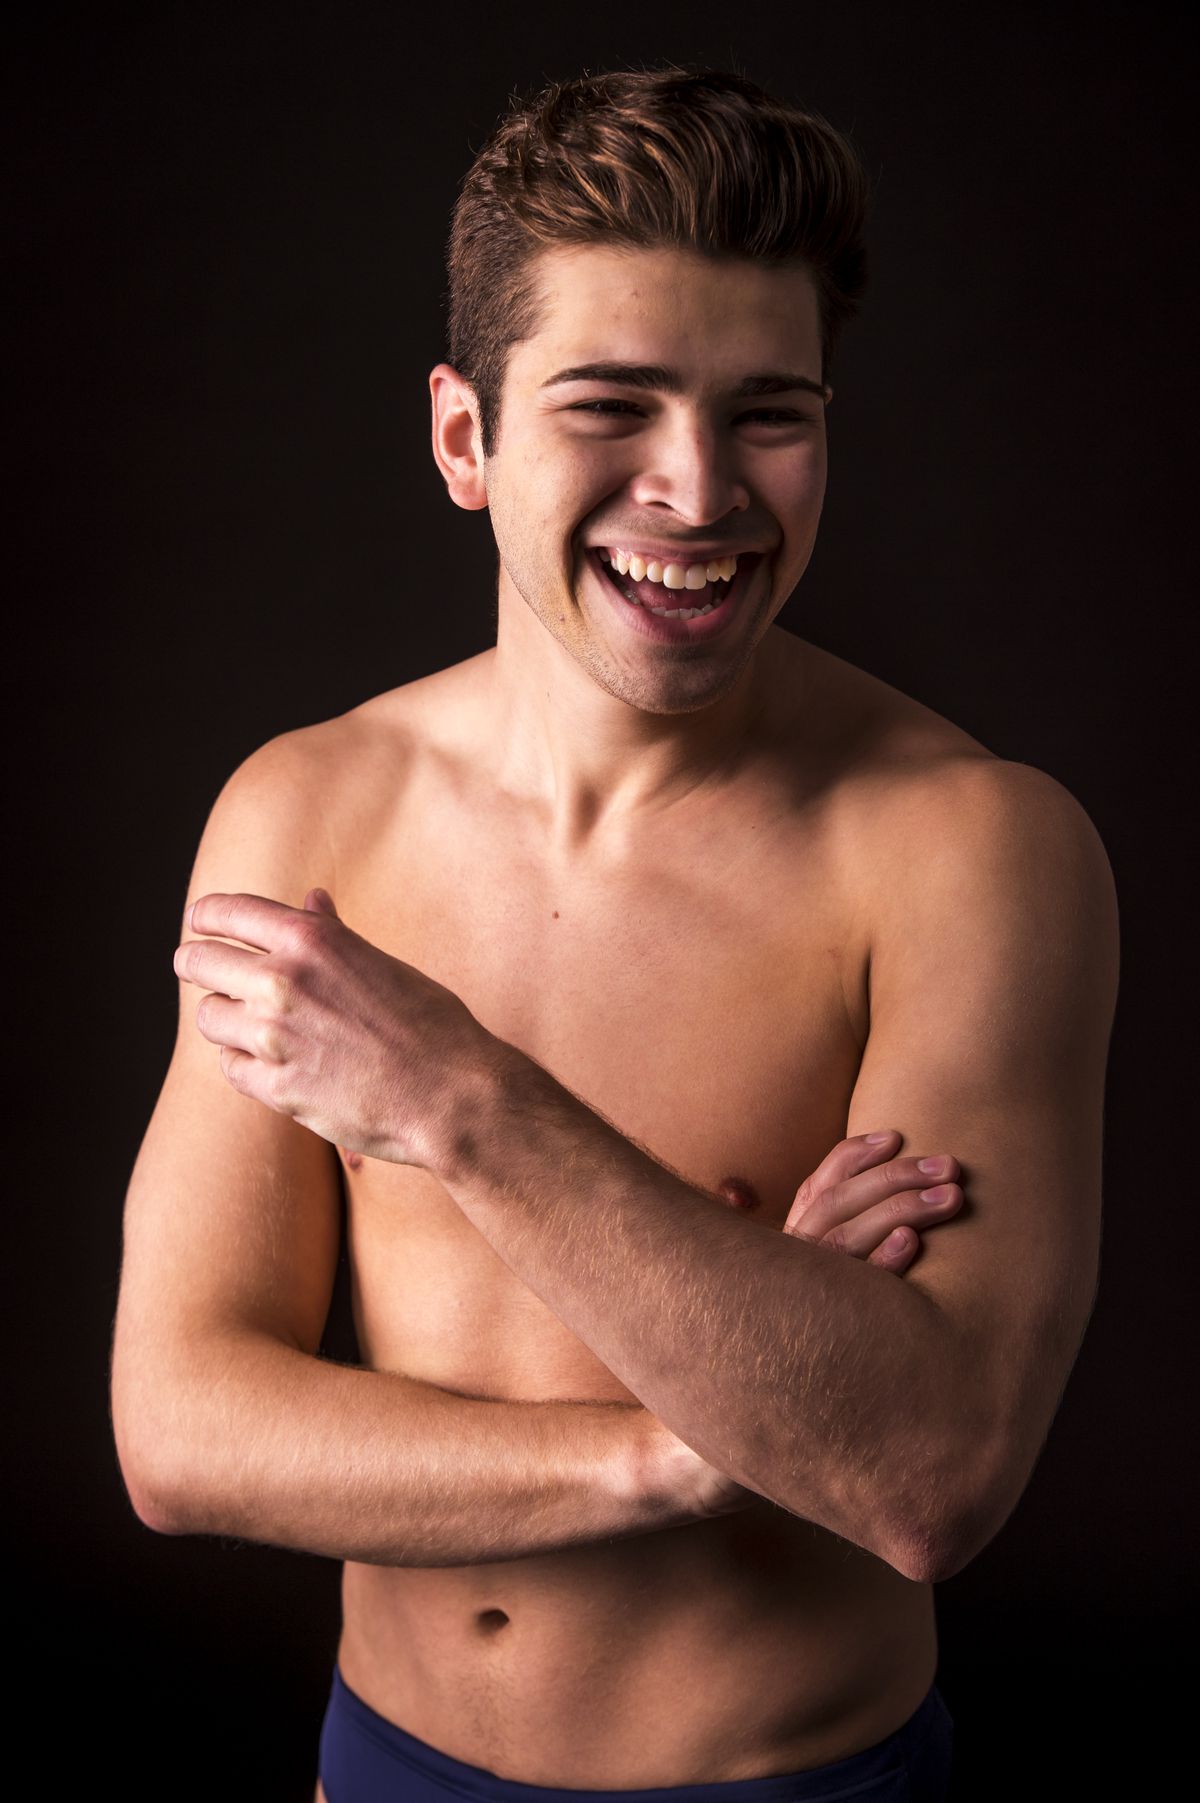 Promo photo of Nathaniel Hernandez for the NCAAs in 2019.